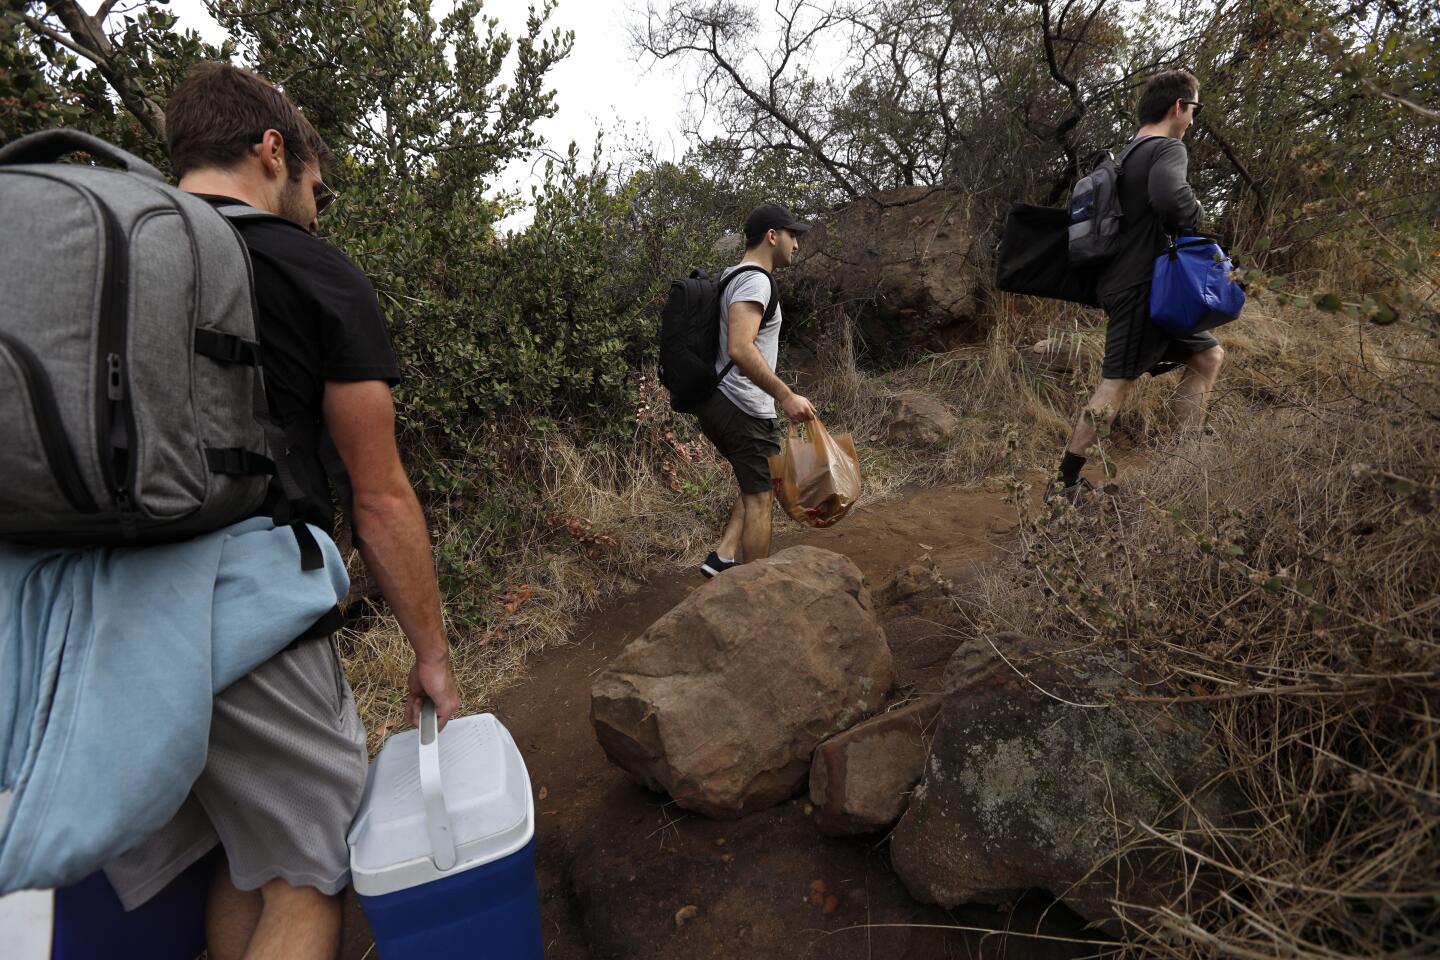 PACIFIC PALISADES, CA - NOVEMBER 30, 2019 - Jack Petros, 28, from left, Dylan Skolnik, 24, and David Weber, 27, members of the Summit Sippers, hike along the Liones Trail in Pacific Palisades on November 30, 2019. Summit Sippers set up impromptu little bars at random view spots on L.A. hiking trails. They wear bow ties, suspenders and one wears a top hat. They are all avid hikers who enjoy the experience of hiking and than setting up their impromptu watering hole. The drinks are free and they won't even take tips. They are careful not to leave trash behind or block spots where hikers might like to take photos. They try and find picturesque sites along LA’s hiking trails. (Genaro Molina / Los Angeles Times)